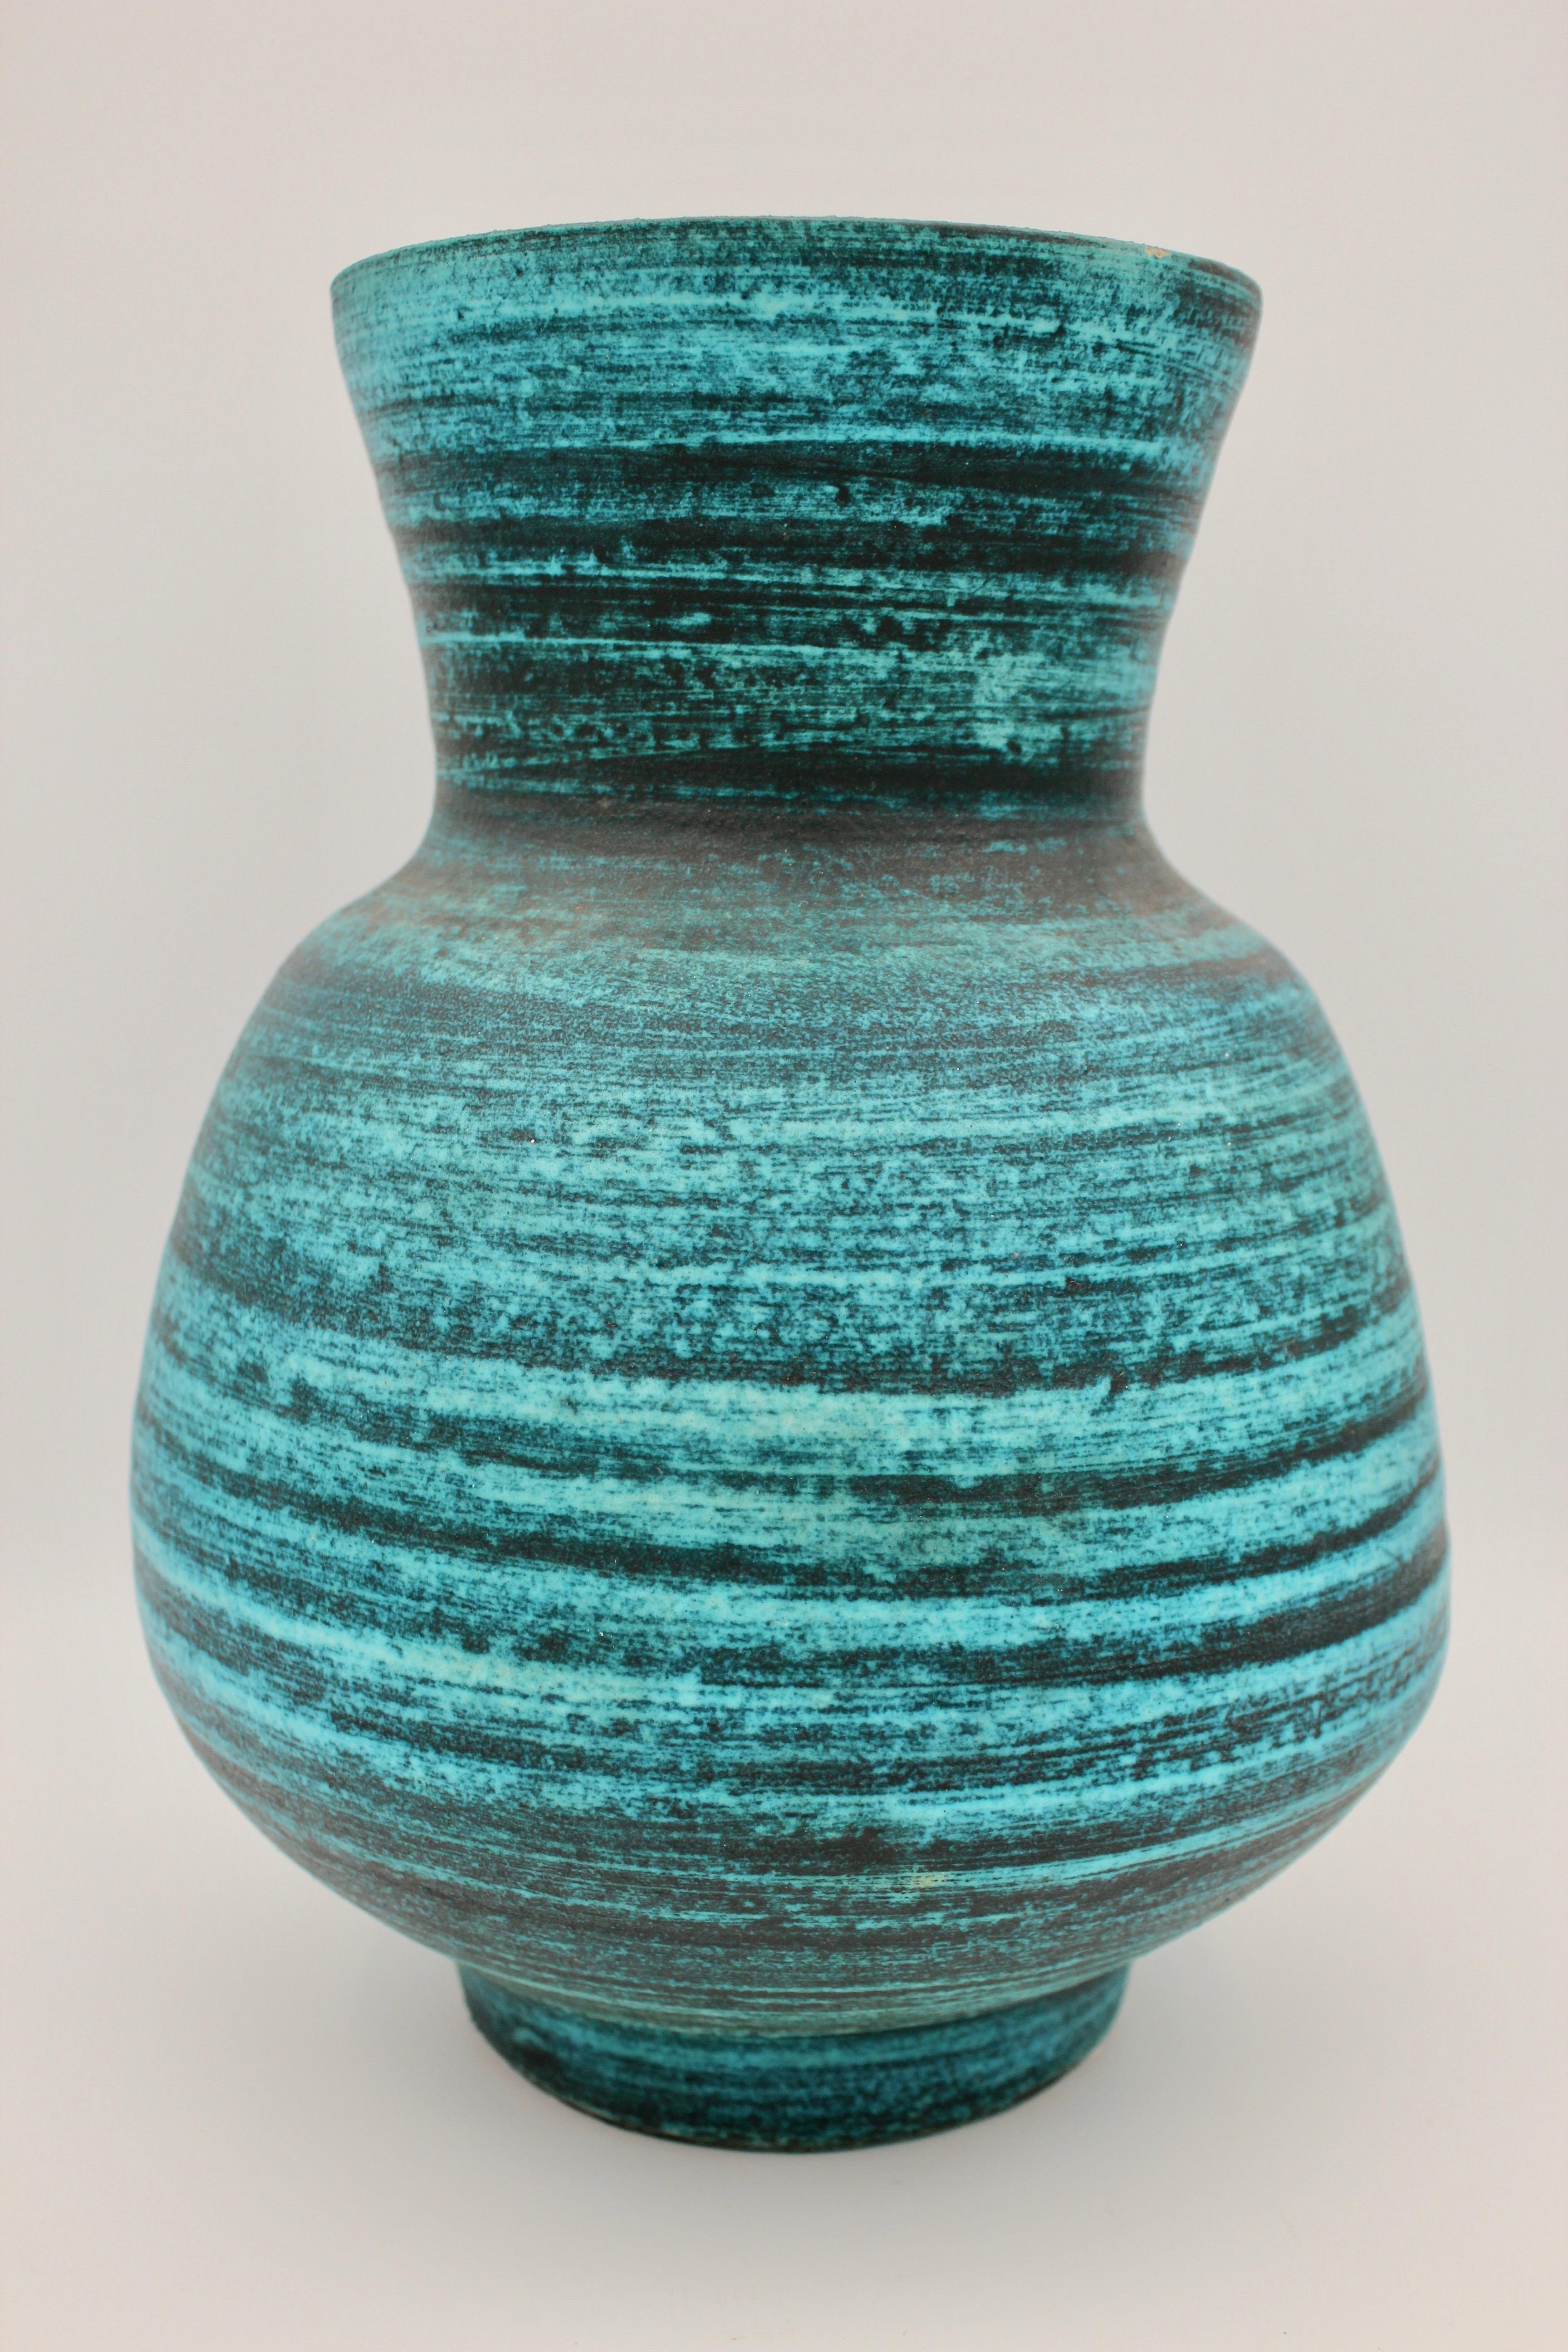 Accolay vase, circa 1960 with printed and striated blue decorations typical of Accolay Potteries.